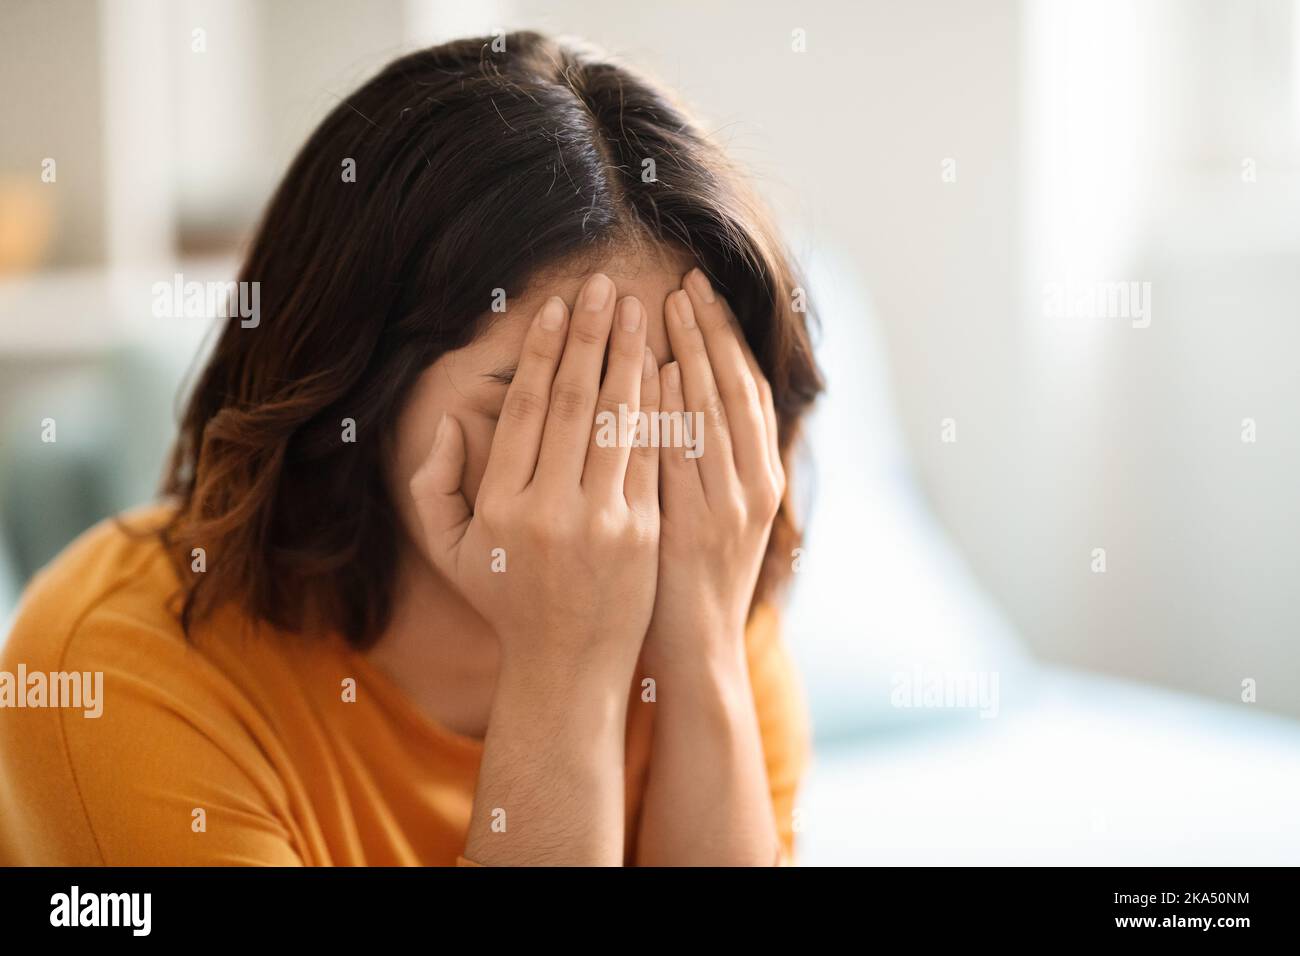 Mental Breakdown Closeup Portrait Of Young Female Crying In Home